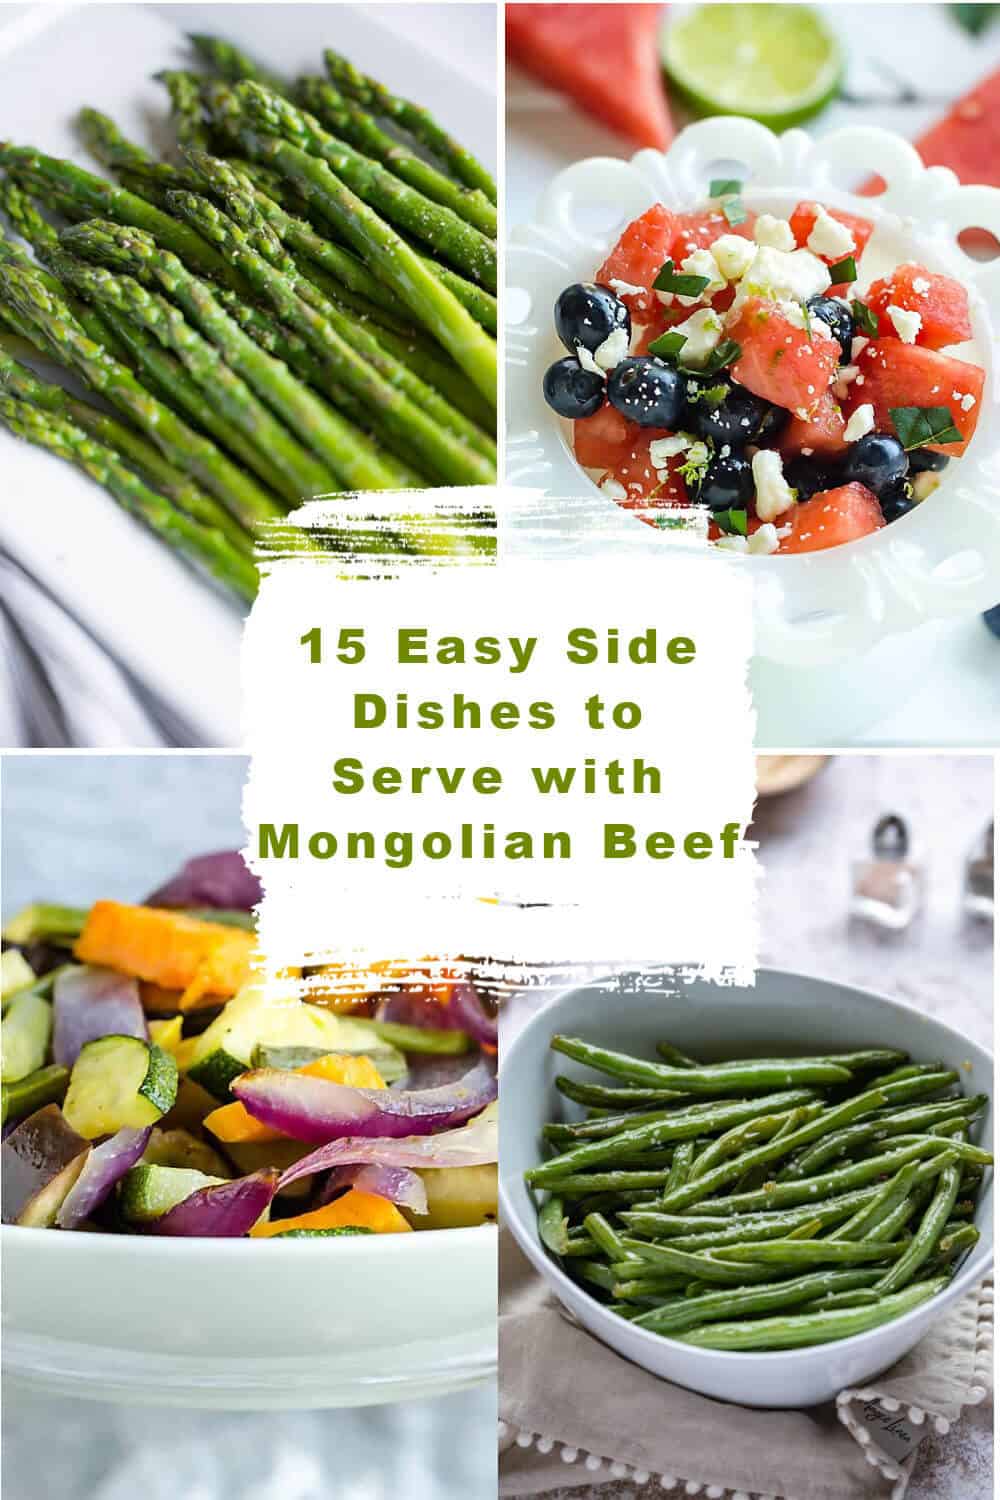 4 image collage of side dishes to serve with Mongolian Beef via @artfrommytable